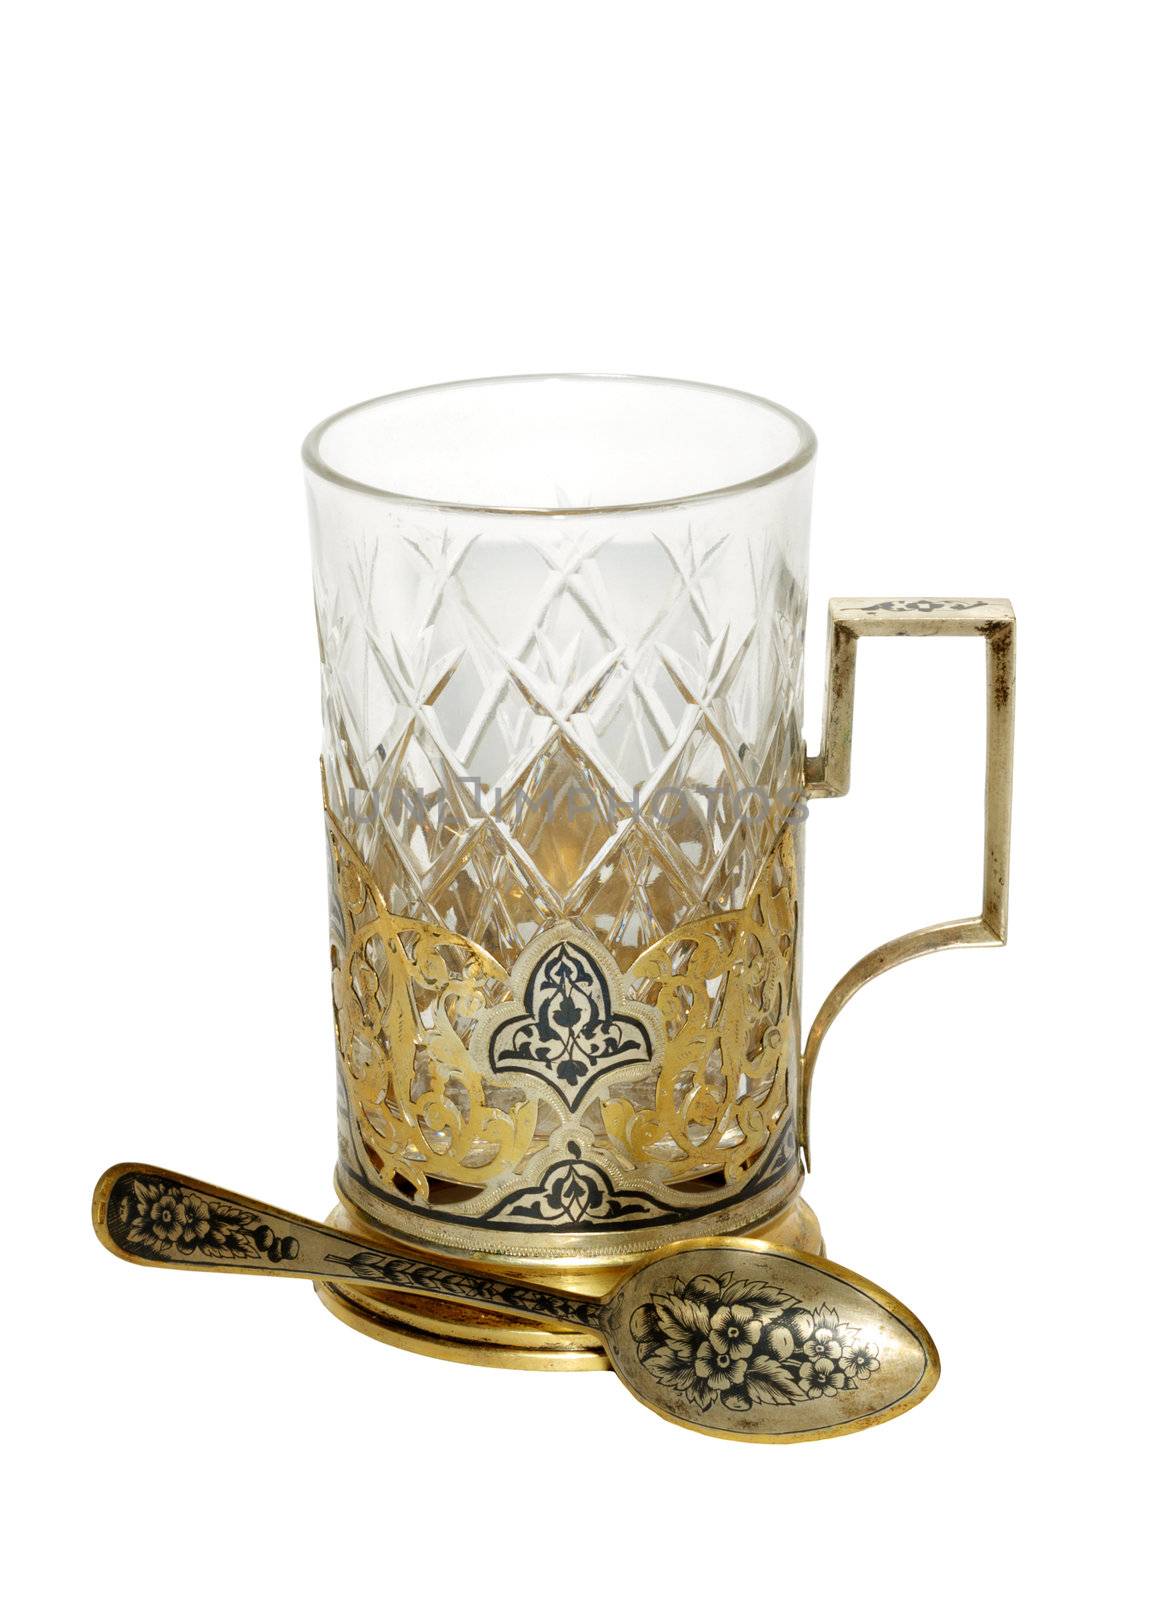 Antique gold holder with crystal glass and a gold spoon. Isolate on white background